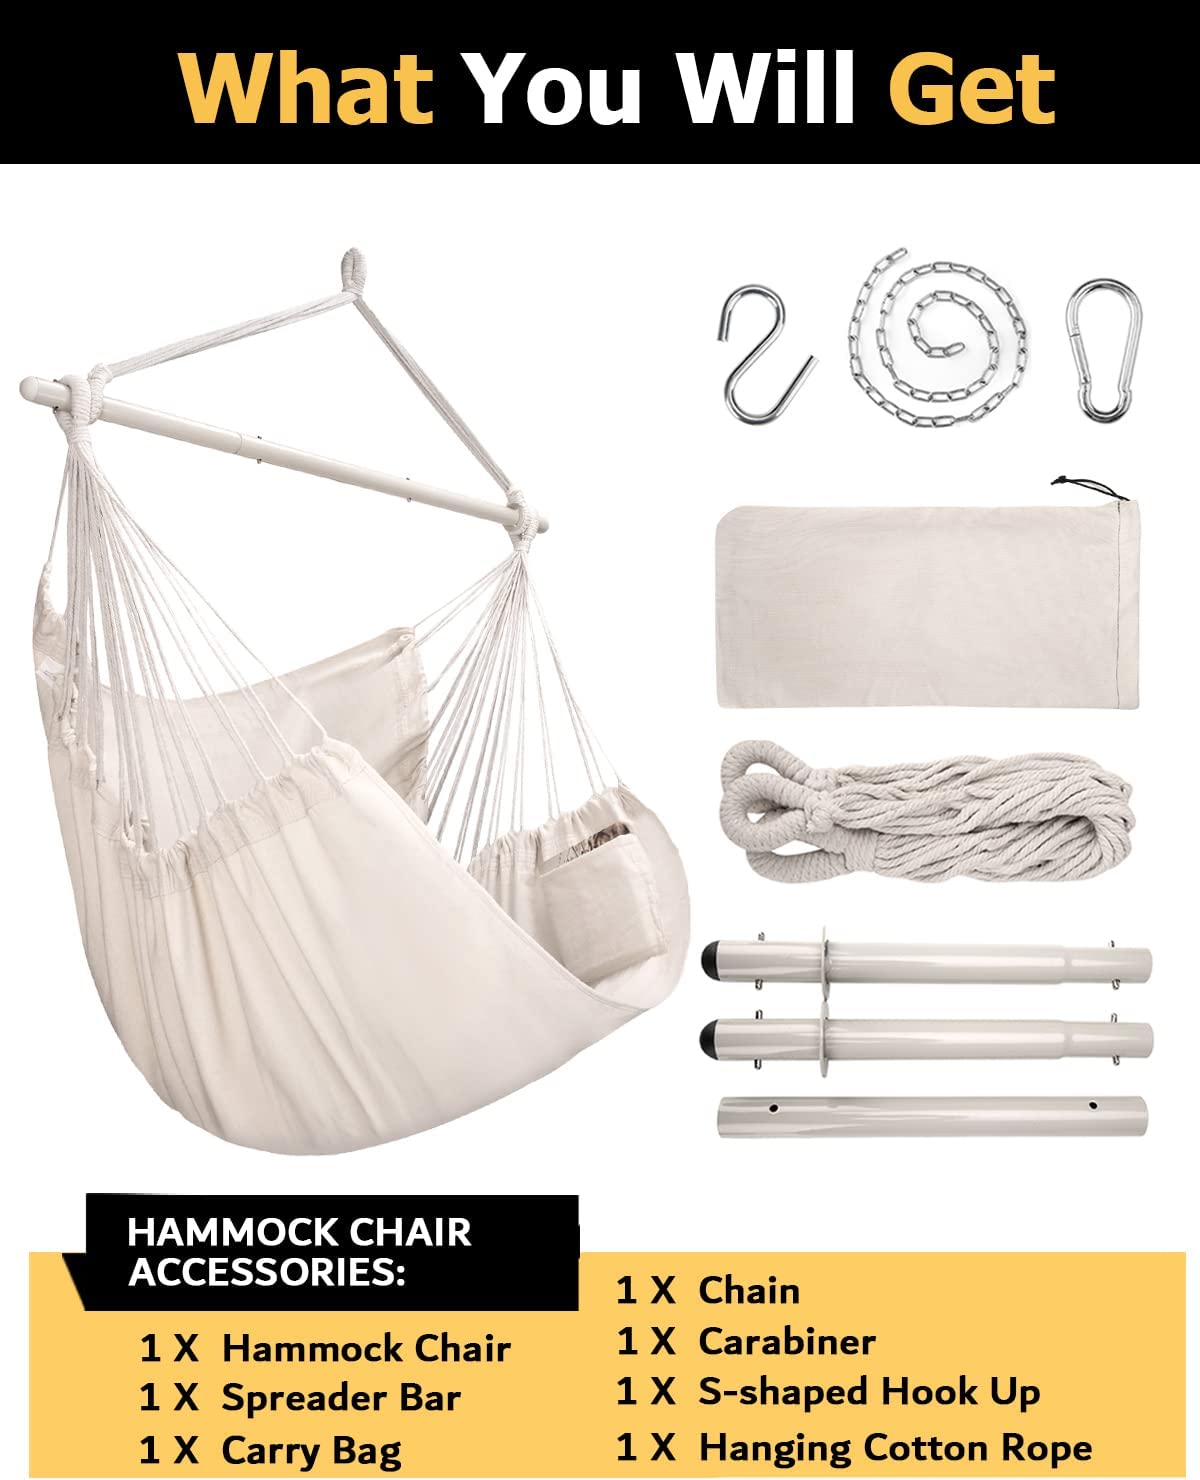 ADVOKAIR Hanging Hammock Chair Large Swing Chair with Foot Rest and Ha